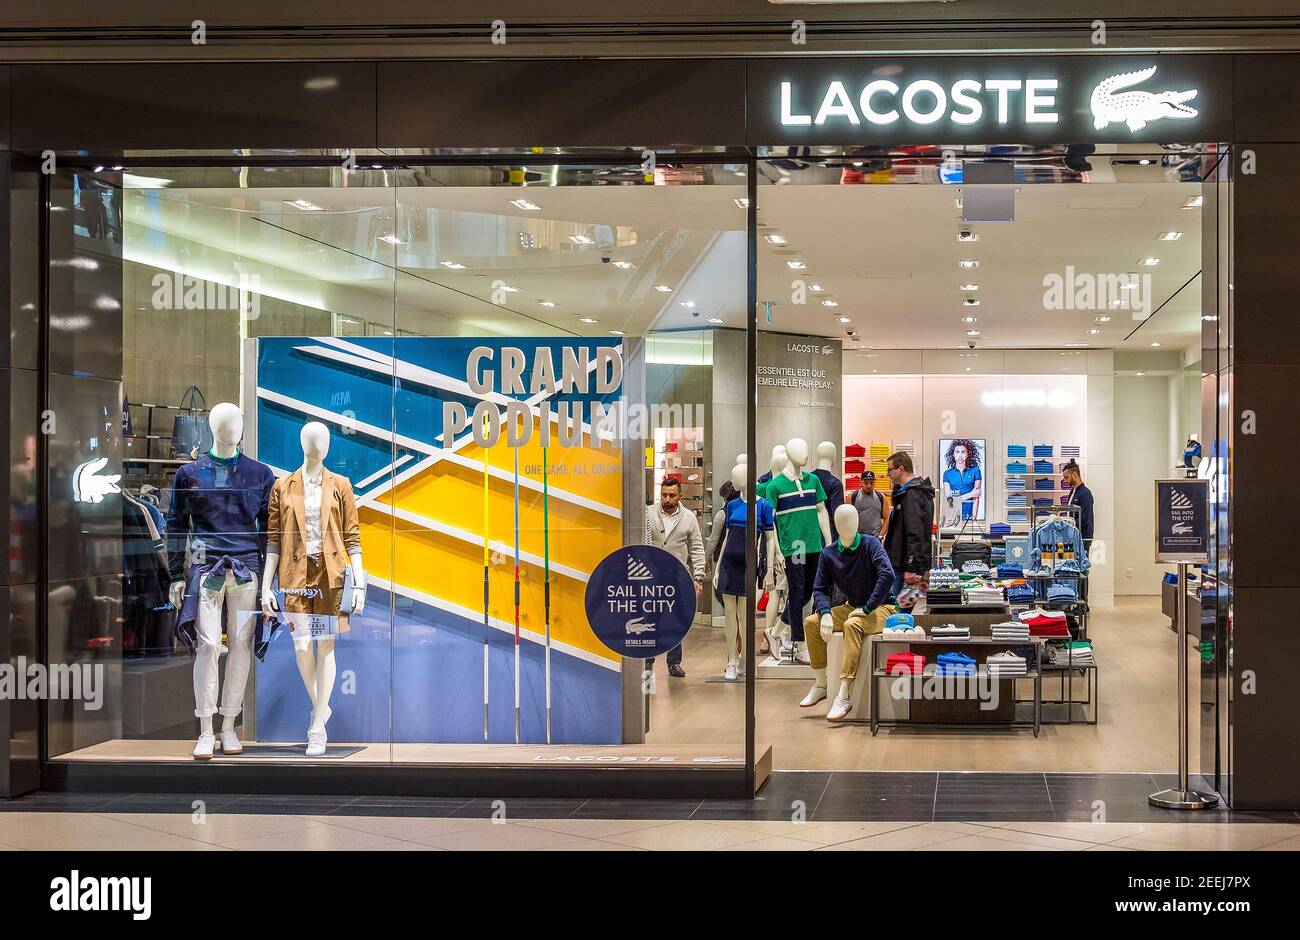 Lacoste Magasin Outlet Offers, 59% OFF | asrehazir.com